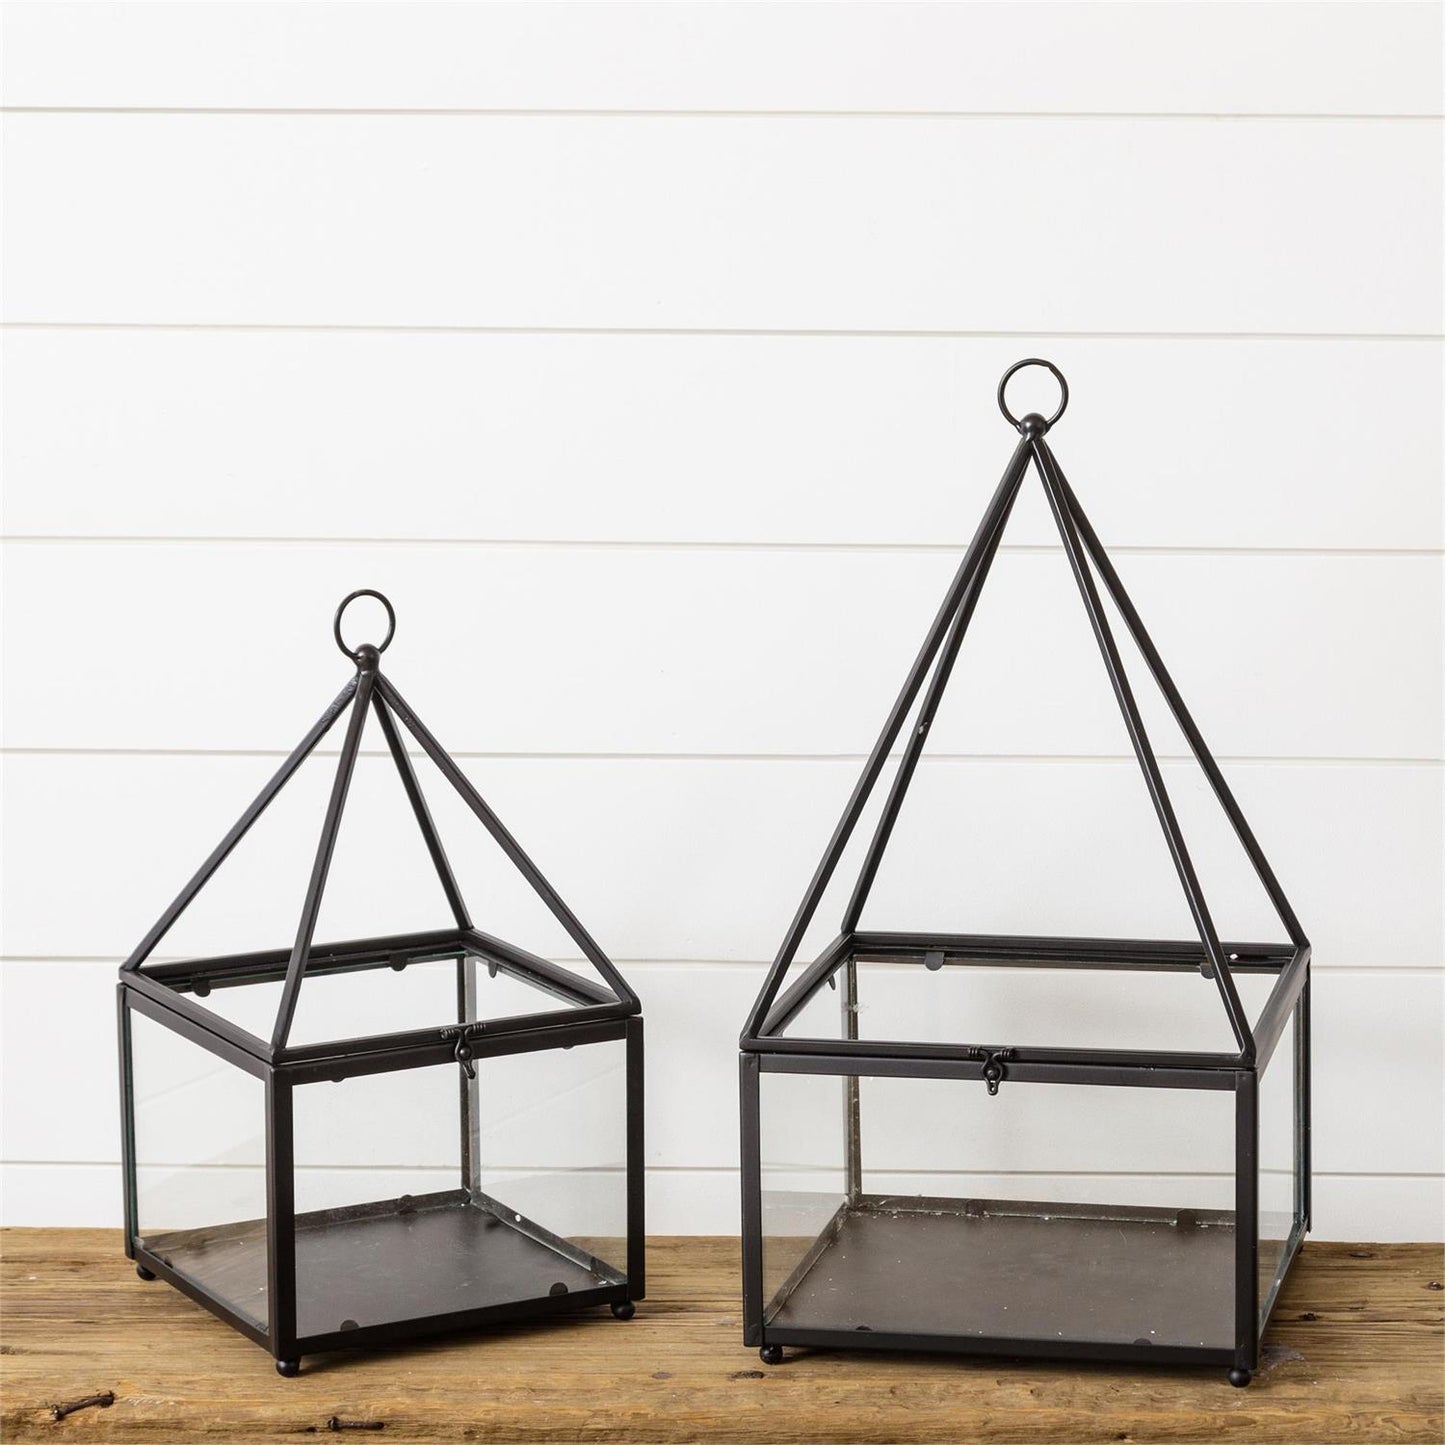 METAL AND GLASS TERRARIUM - TRIANGLE ROOF, Set of 2